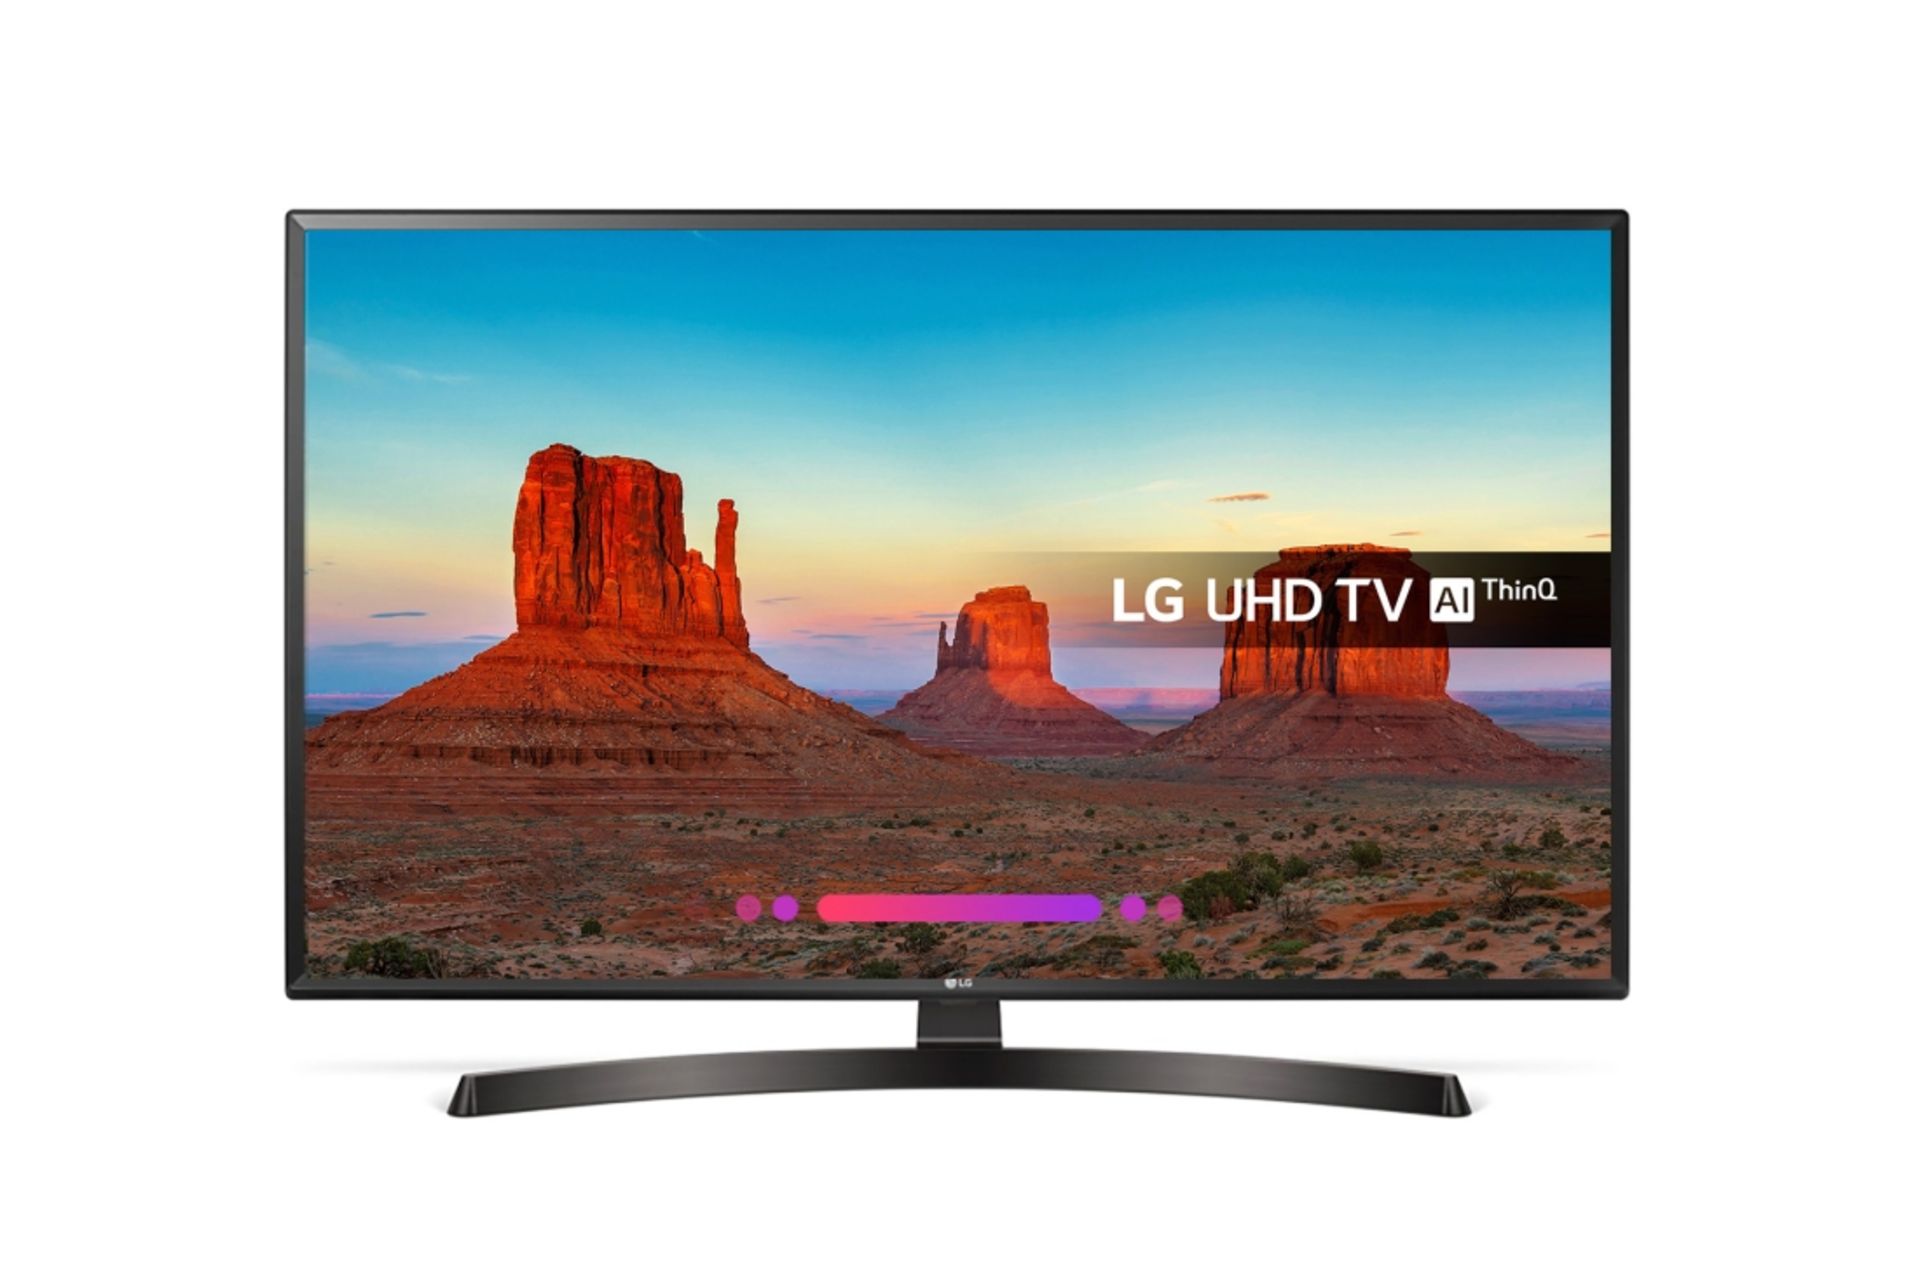 V Grade A LG 43 Inch ACTIVE HDR 4K ULTRA HD LED SMART TV WITH FREEVIEW HD & WEBOS 4.0 & WIFI - AI TV